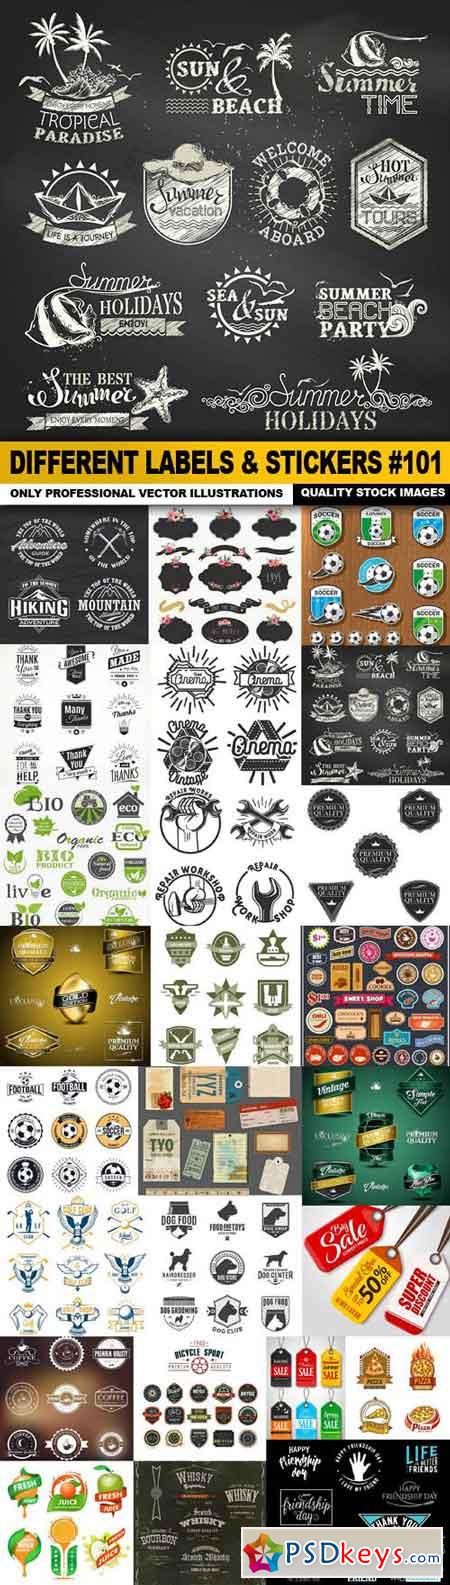 Different Labels & Stickers #101 - 25 Vector